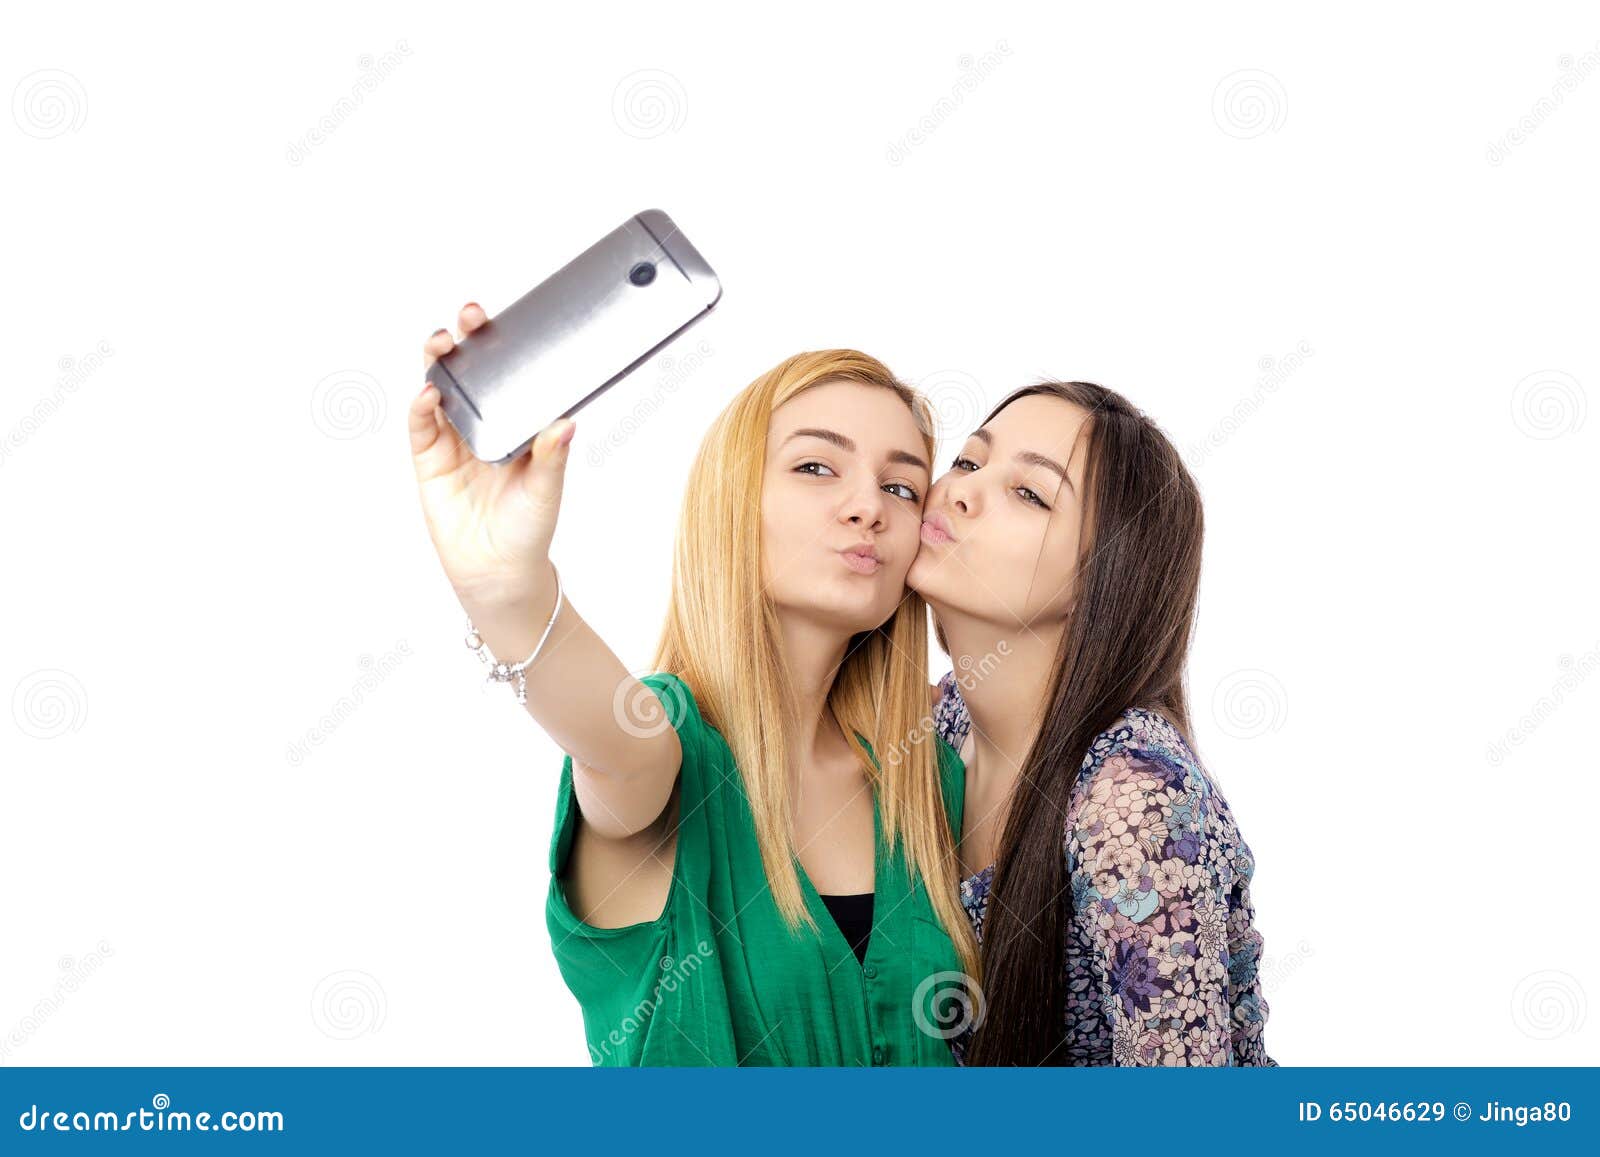 Two Pretty Girls Blonde And Brunette Taking Funny Selfie Kiss Stock Image Image Of Beauty